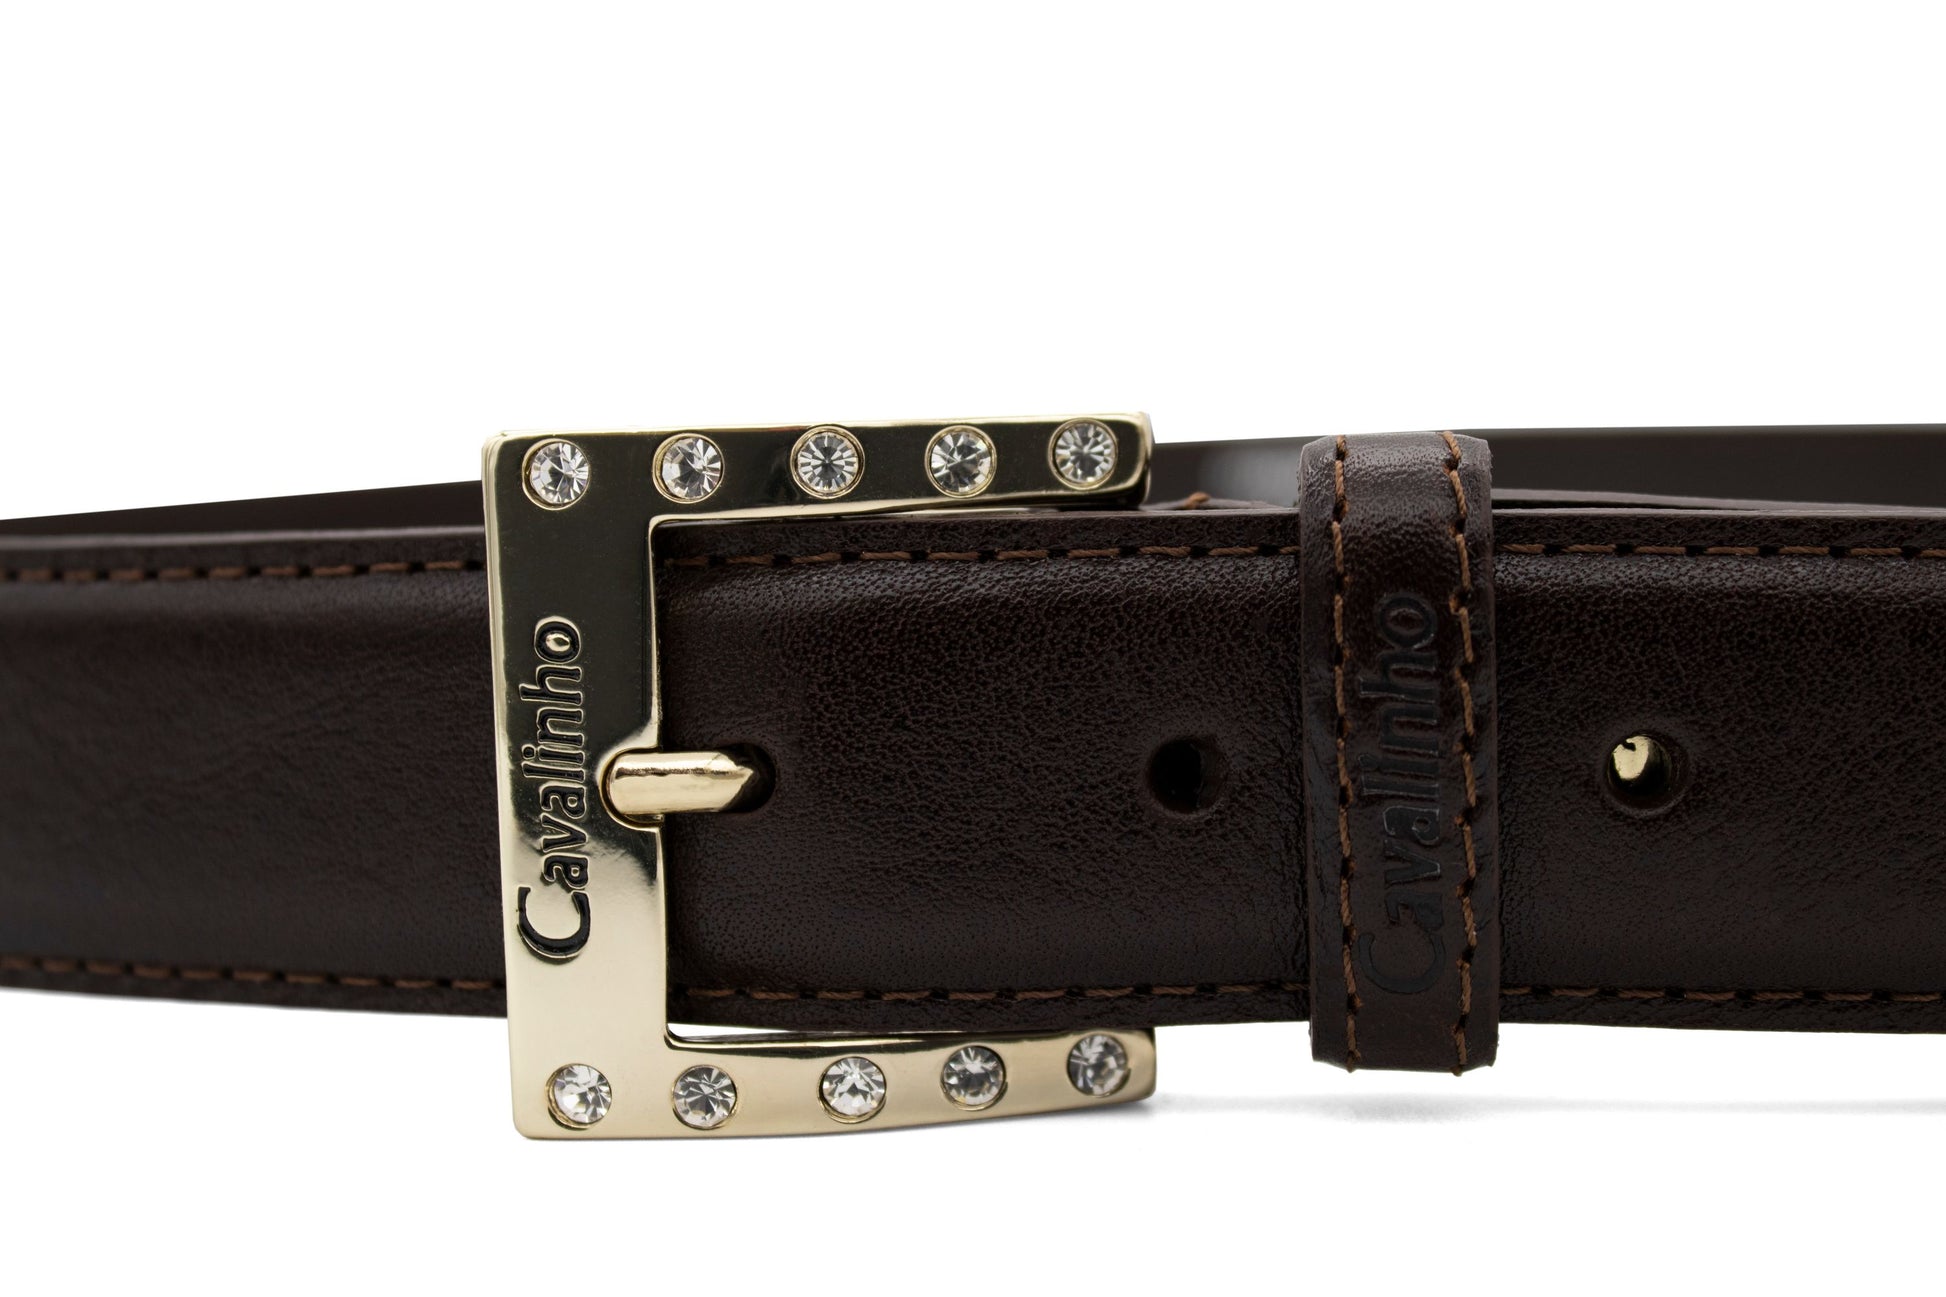 #color_ Brown Gold | Cavalinho Classic Leather Belt - Brown Gold - 58010905.02_2_f75d8c25-7ce3-4616-be7f-f2f943535c88